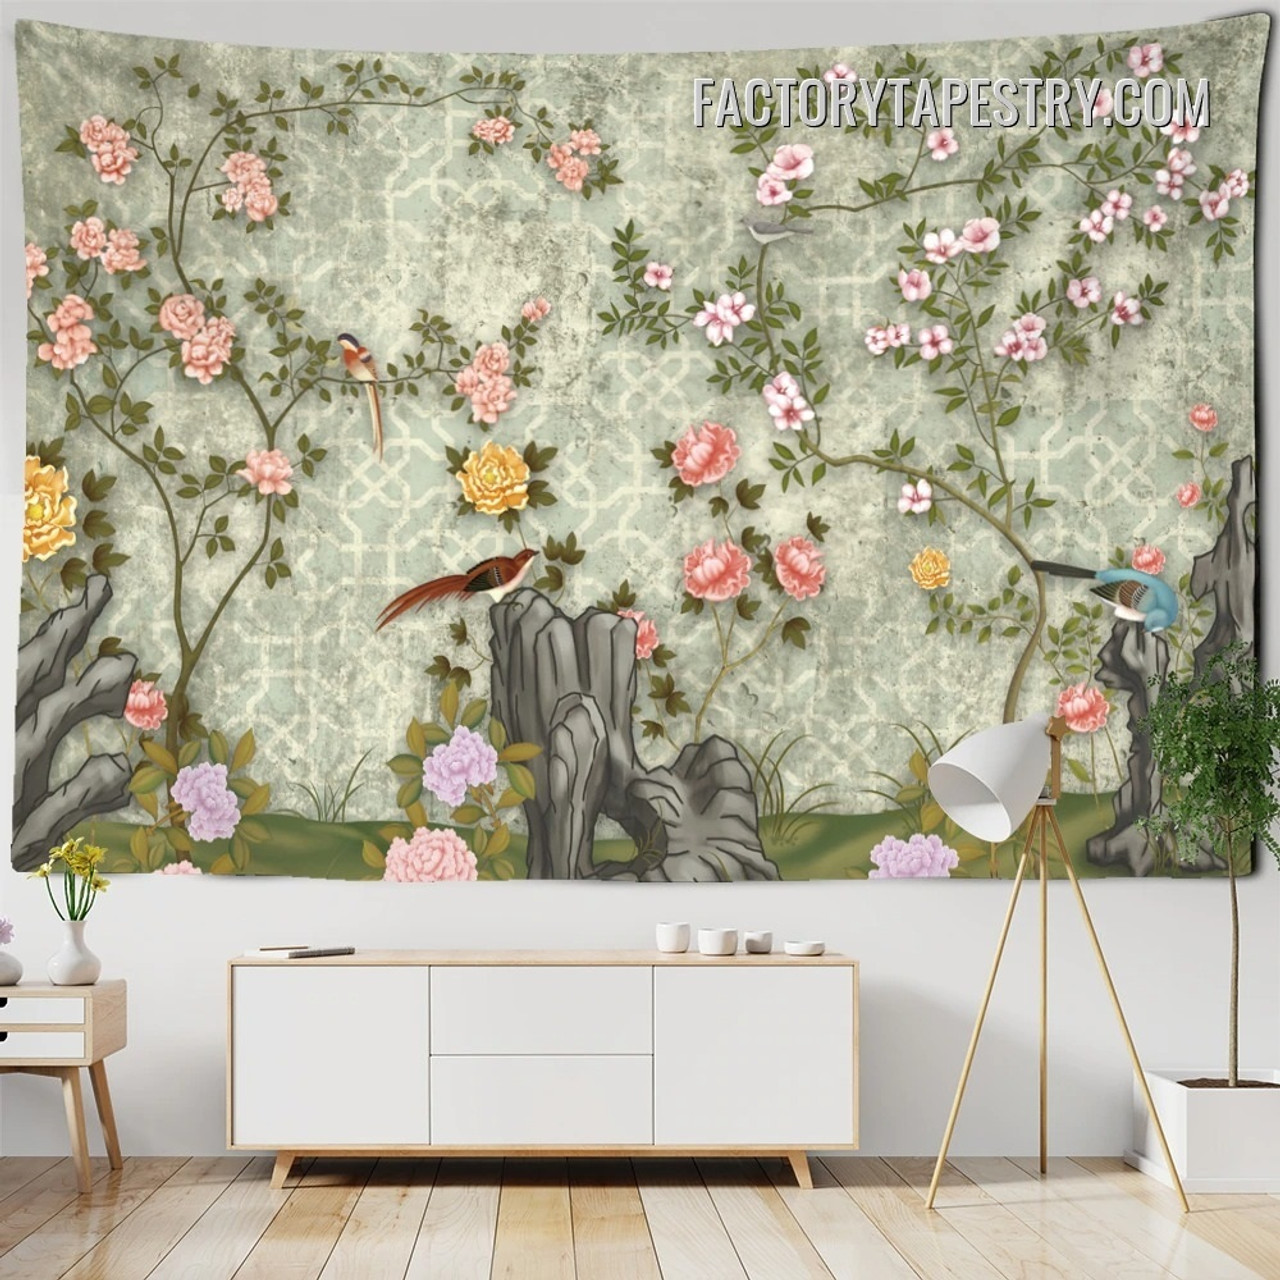 Birds and Flowers VI Floral Retro Wall Decor Tapestry